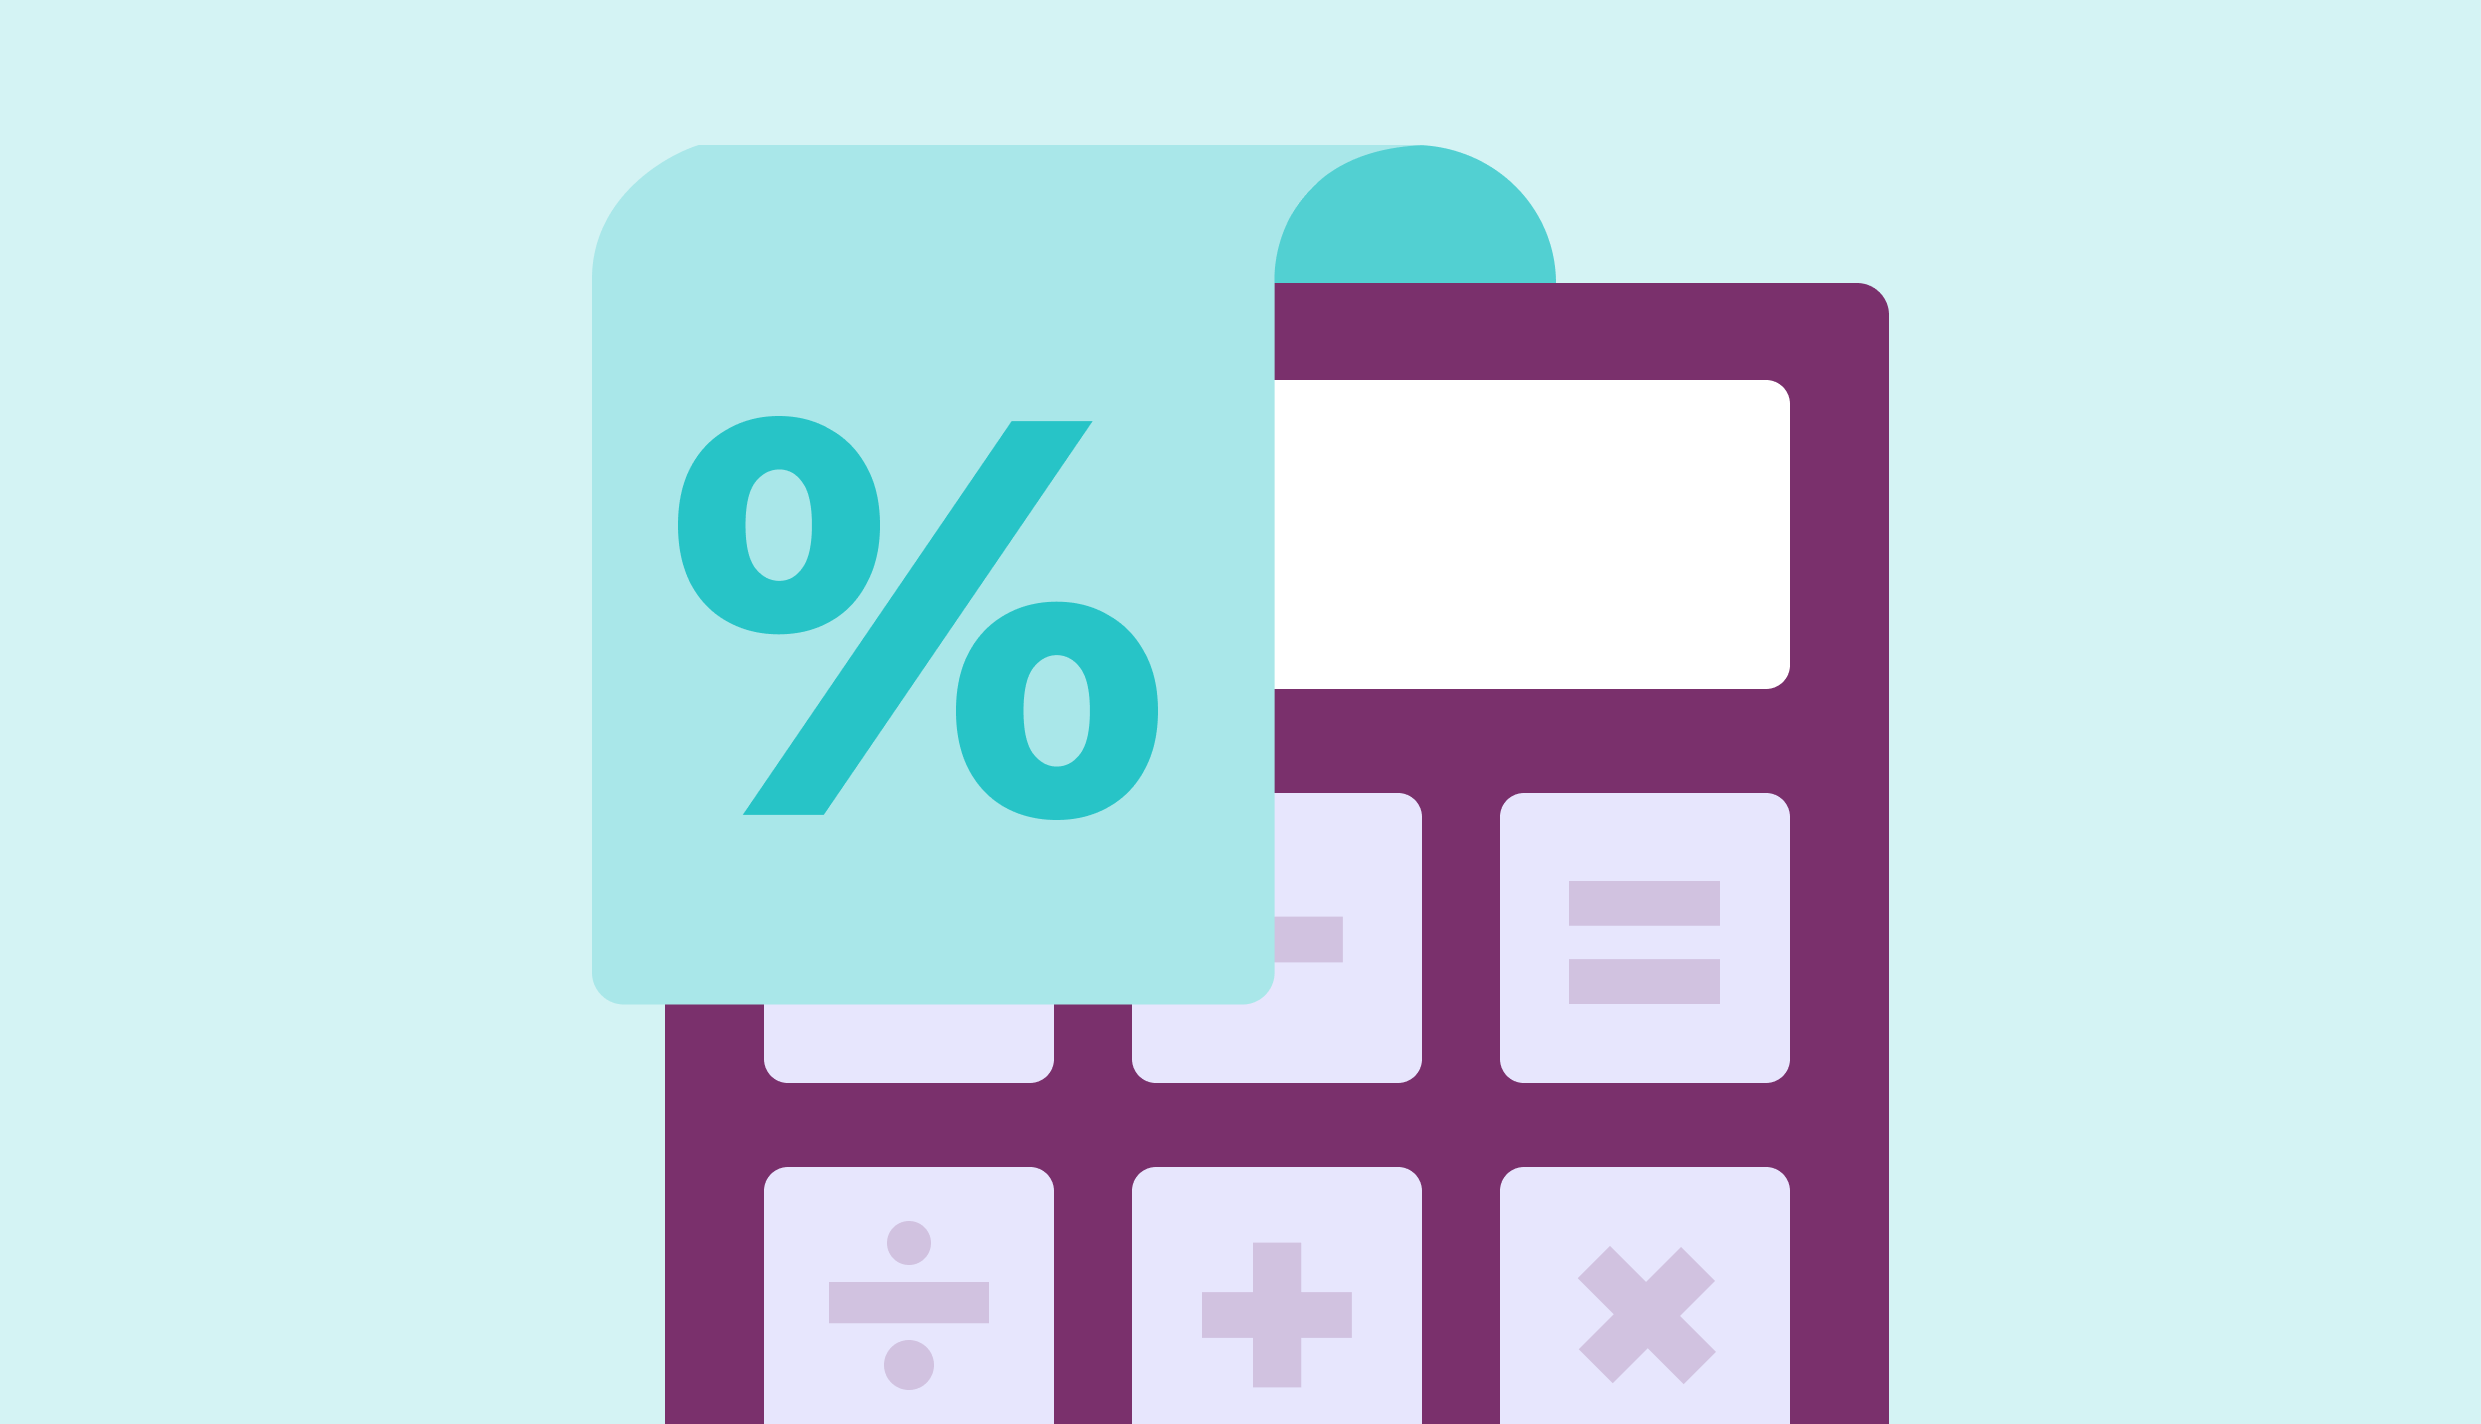 How Do You Calculate Billable Utilization Rate?